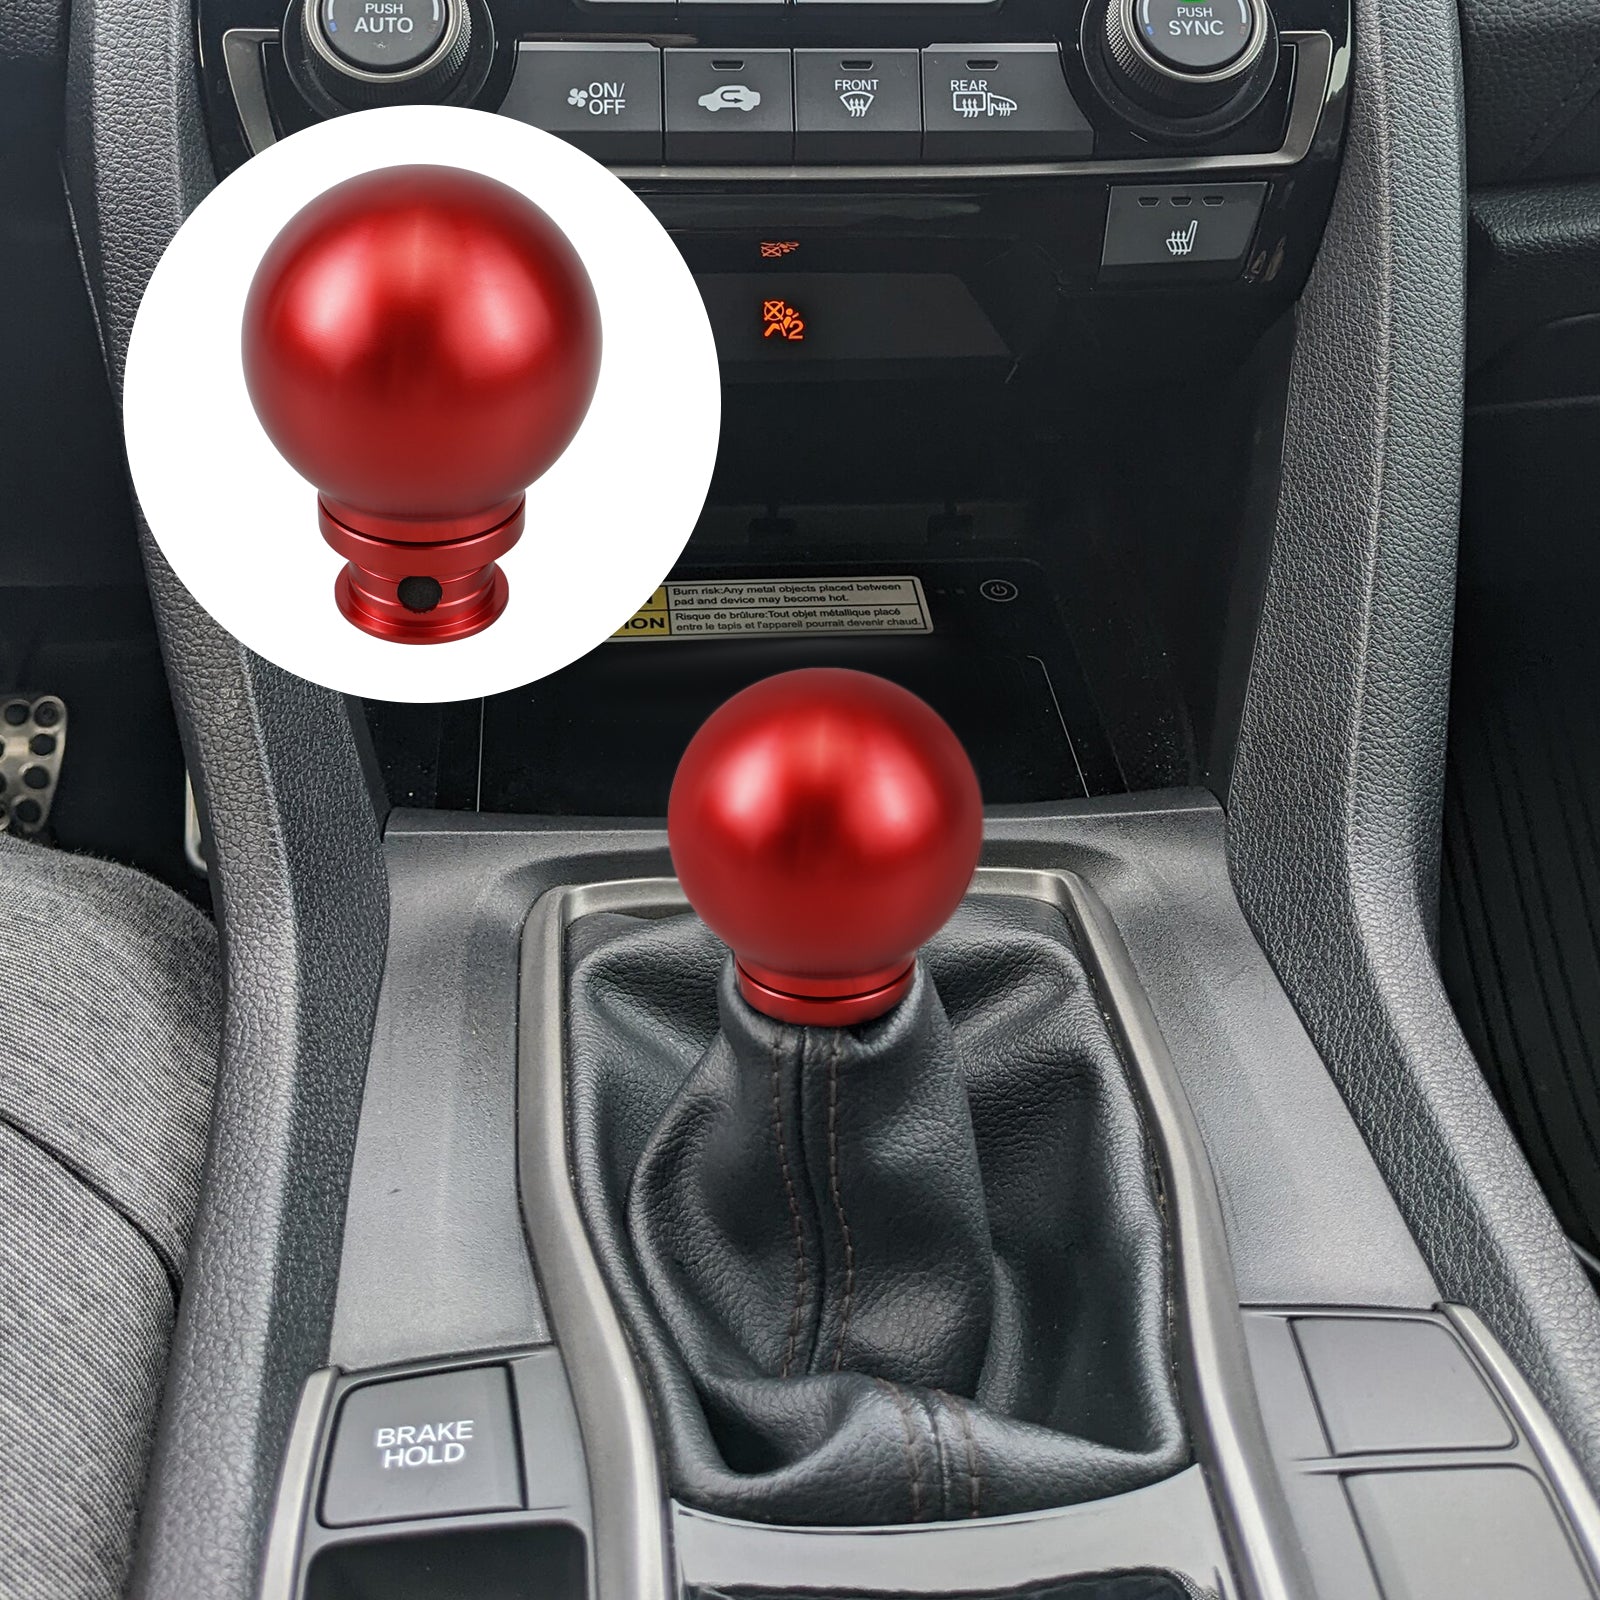 BEVINSEE Low-Profile Shift Knob Kit For Honda Civic Accord Acura RSX RSX-S TSX